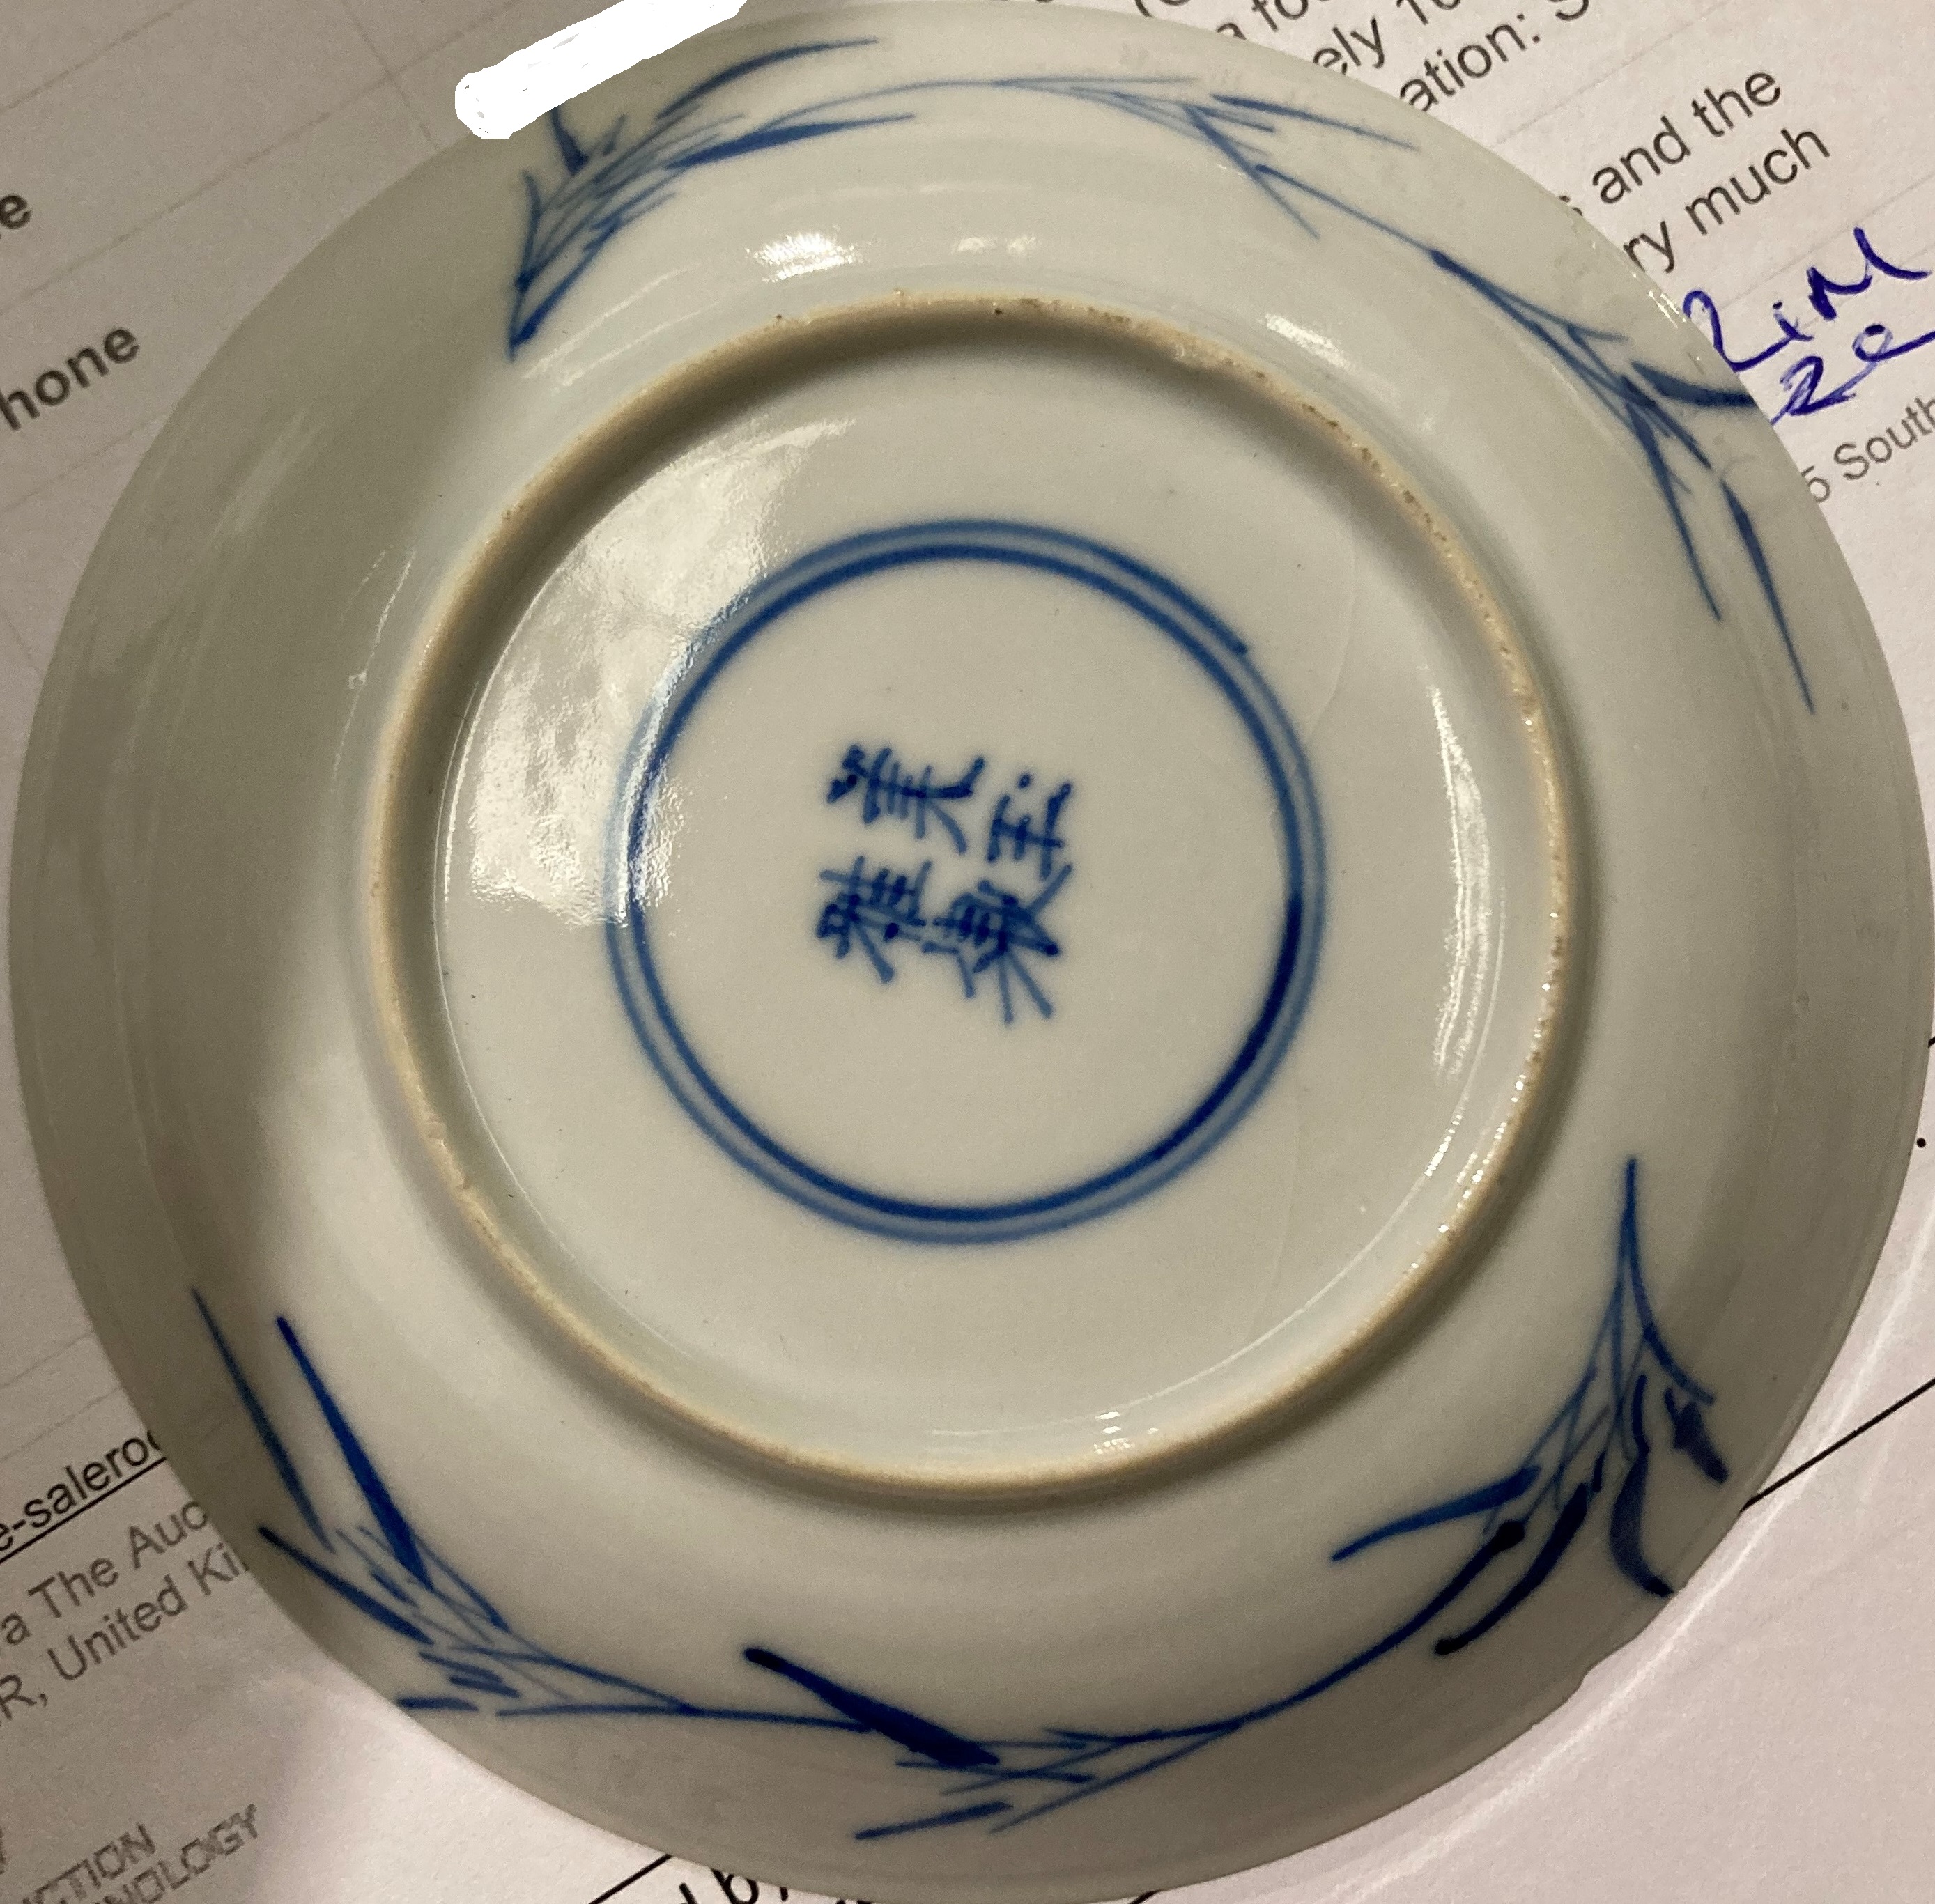 Rare antique blue and white Kangxi Chinese porcelain small plate (Circa 1680) with riding horsemen - Image 6 of 7